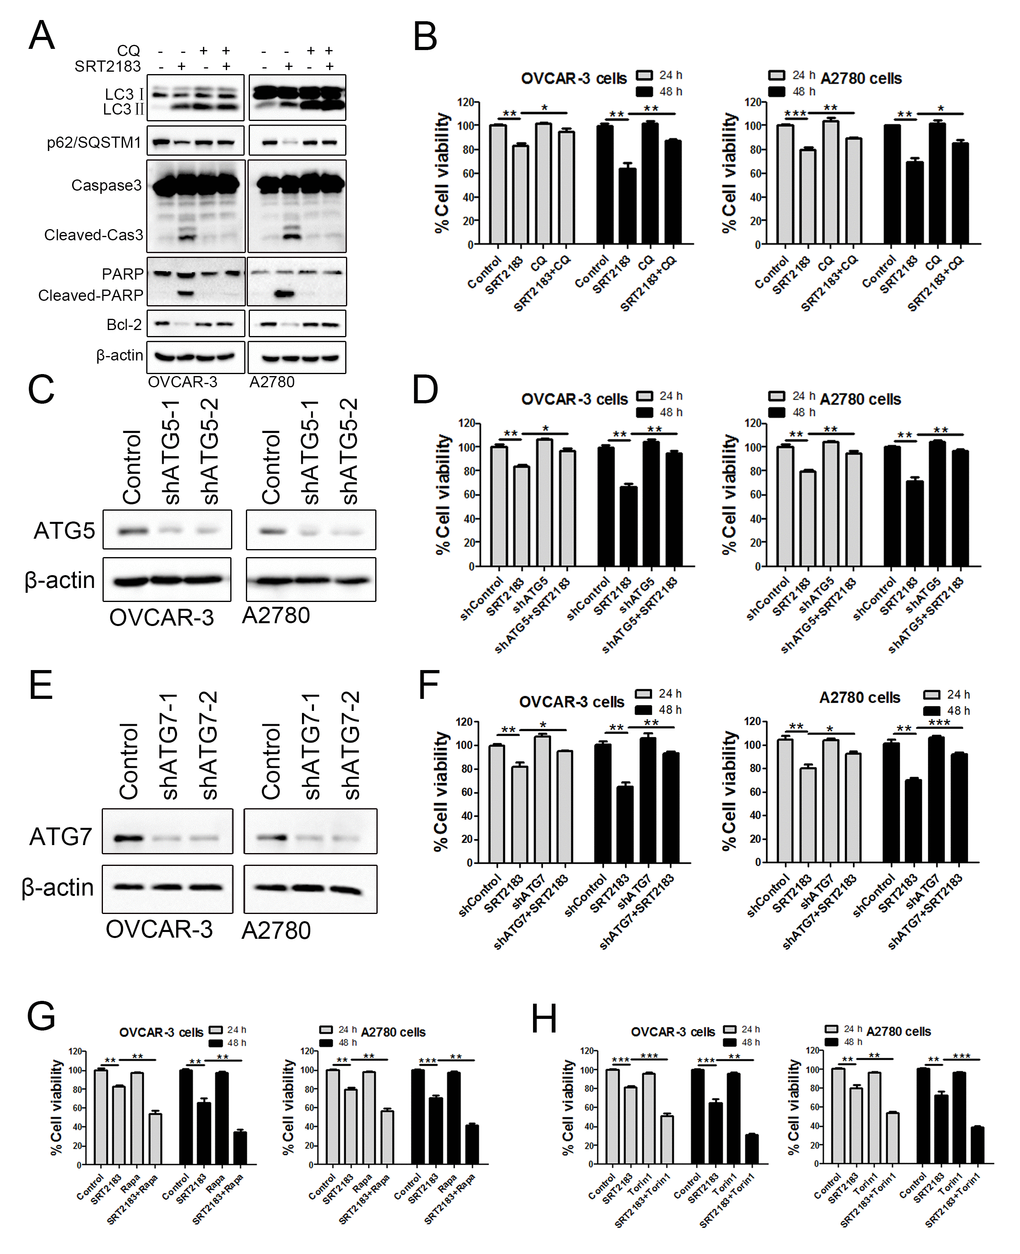 The anti-carcinoma activity of SRT2183 is dependent on autophagy. (A) OVCAR-3 and A2780 cells were pre-treated with chloroquine (CQ) for 6 h, then treated with vehicle or 1 μM SRT2183. The expression of LC3, p62/SQSTM1, Caspase3, PARP and Bcl-2 was detected by western blot. (B) OVCAR-3 and A2780 cells were treated by the same procedure described in (A) for 24 and 48 h, the viability of OVCAR-3 and A2780 cells were detected by CCK8 assay. (C) The expression of autophagy related 5 (ATG5) was knocked down by shRNA-lentivirus (shATG5-1 and shATG5-2) and the protein was determined by western blot. (D) OVCAR-3 and A2780 cells were treated by vehicle, shATG5-1, 1 μM SRT218 or the combination of shATG5-1 and SRT218 for 24 and 48 h. The viability of the cells was evaluated by CCK8 assay. (E) The expression of autophagy related 5 (ATG5) was detected by western blot and (F) The cell viability was determined after the cells were treated by 1 μM SRT2183 for 24 and 48 h. (G, H) OVCAR-3 and A2780 cells were pre-treated with 0.1 μM Rapamycin (Rapa) or 0.05 μM Trion 1 for 6 h, then the cells were treated with vehicle or 1 μM SRT2183 for 24 and 48 h. The cell viability was detected by CCK8 assay. N=3 for (A) and (C); N=5 for (B), N=6 for (D), (E) and (F). * indicates P P P 